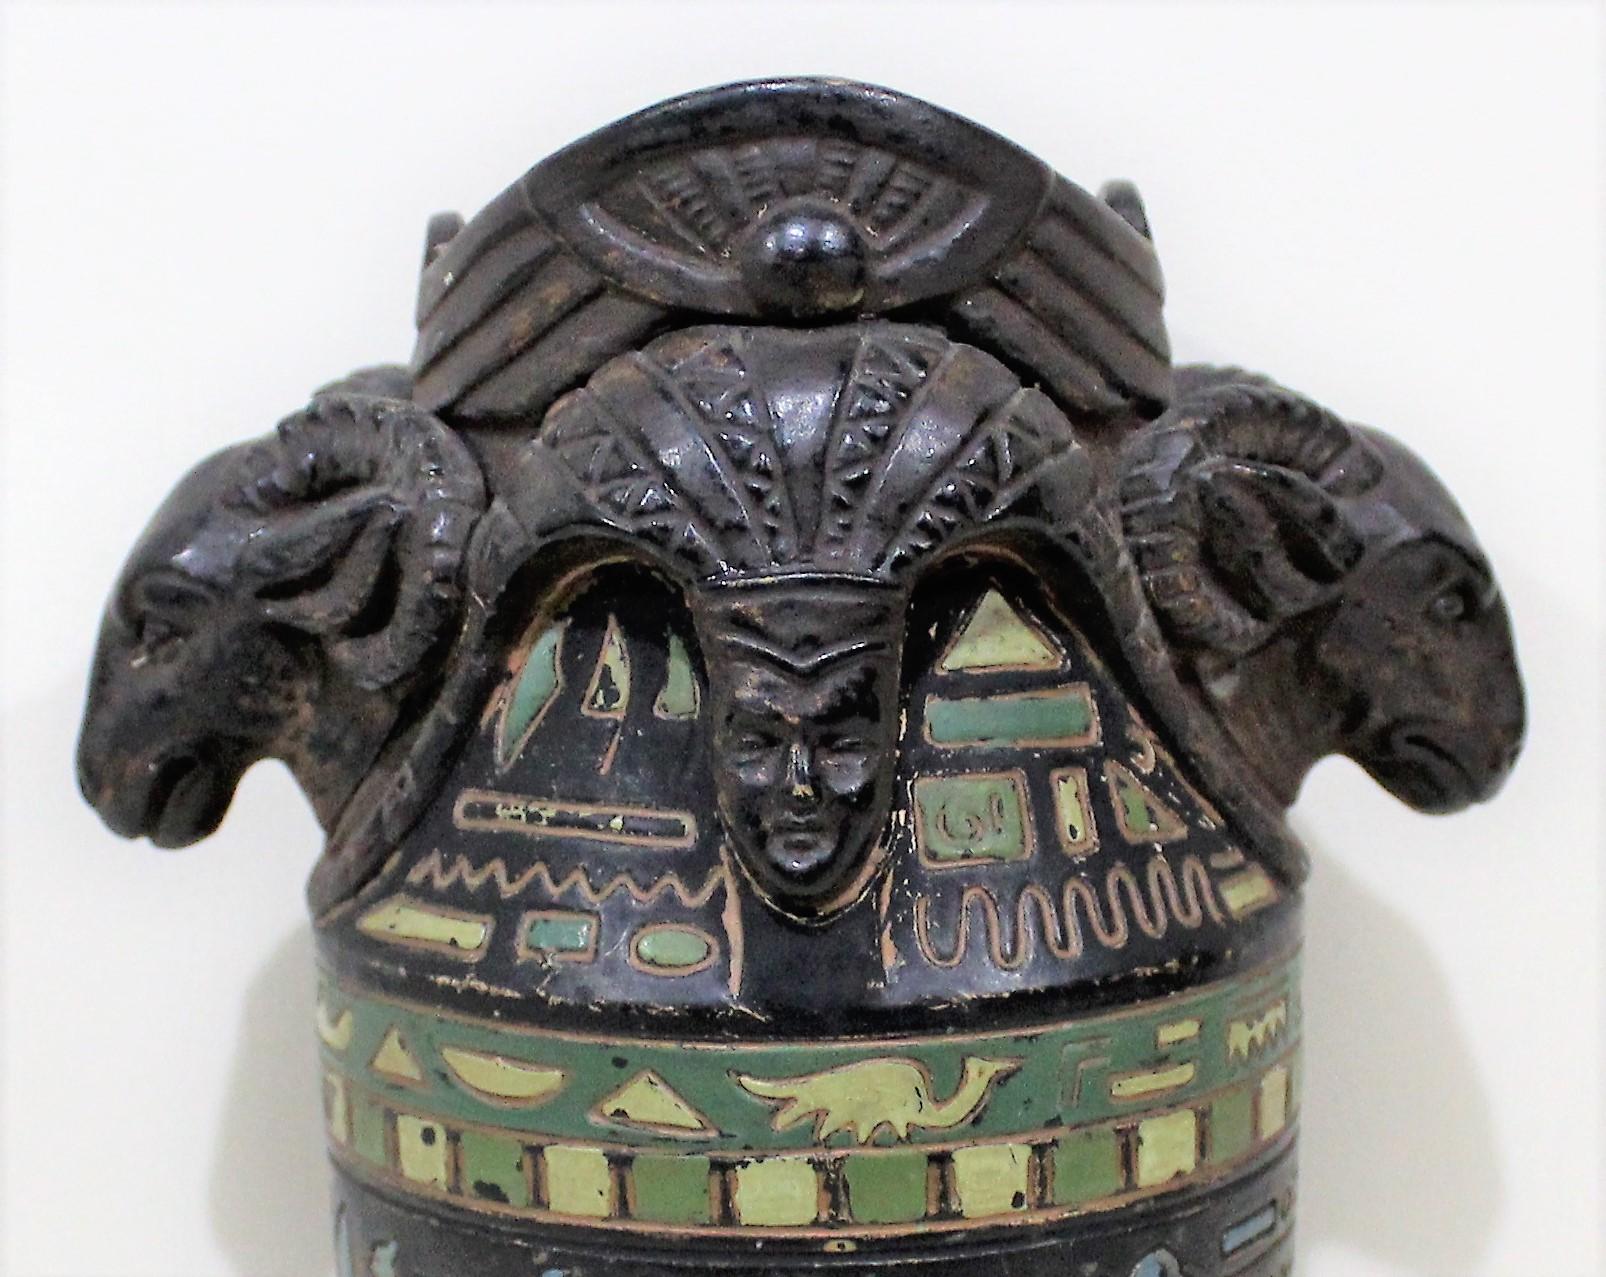 Egyptian Revival cold painted ceramic figural vase with rams heads & hieroglyphics.